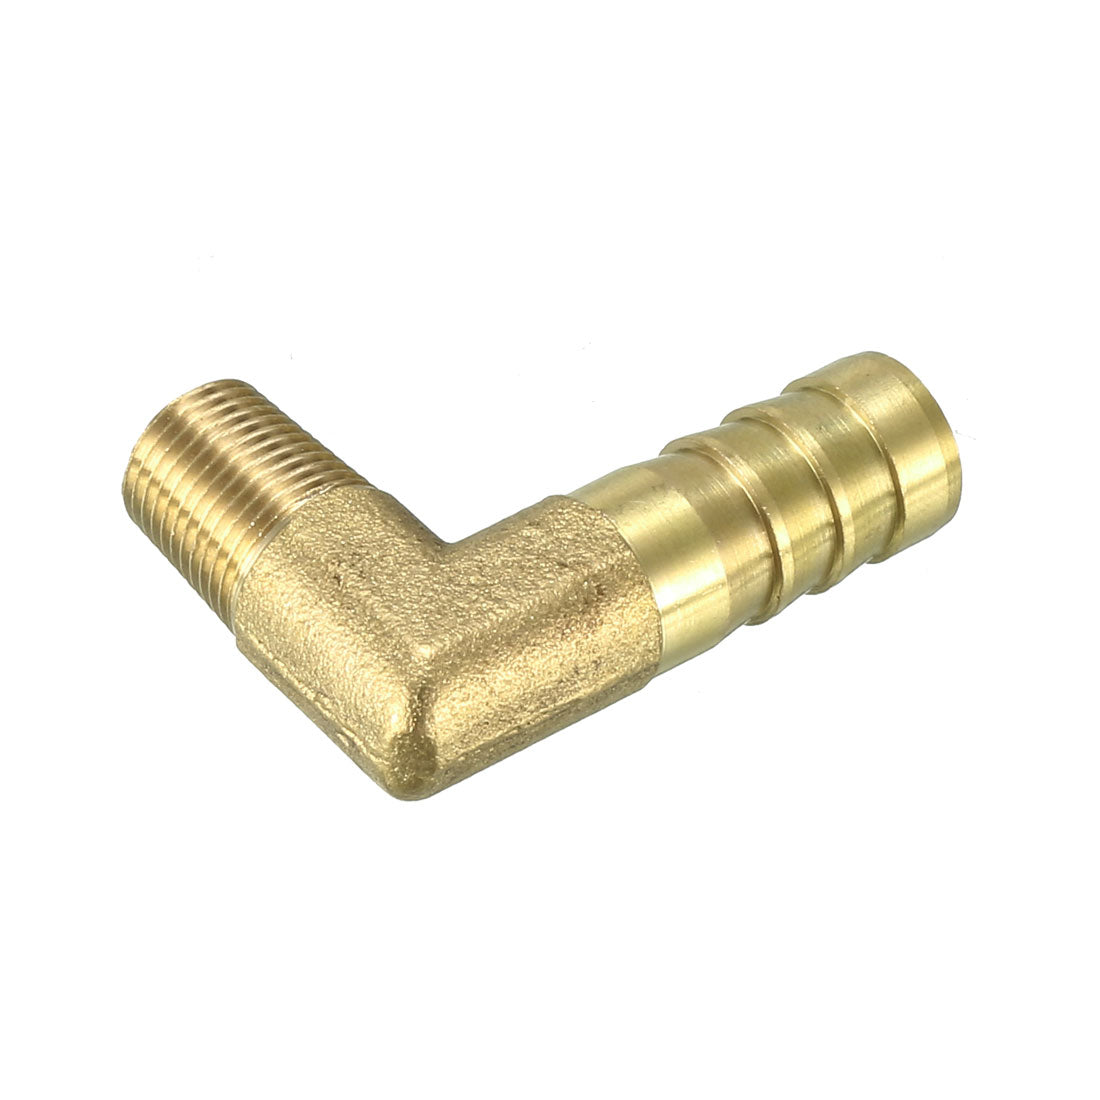 uxcell Uxcell Brass Barb Hose Fitting 90 Degree Elbow 10mm Barbed x 1/8 PT Male Connector